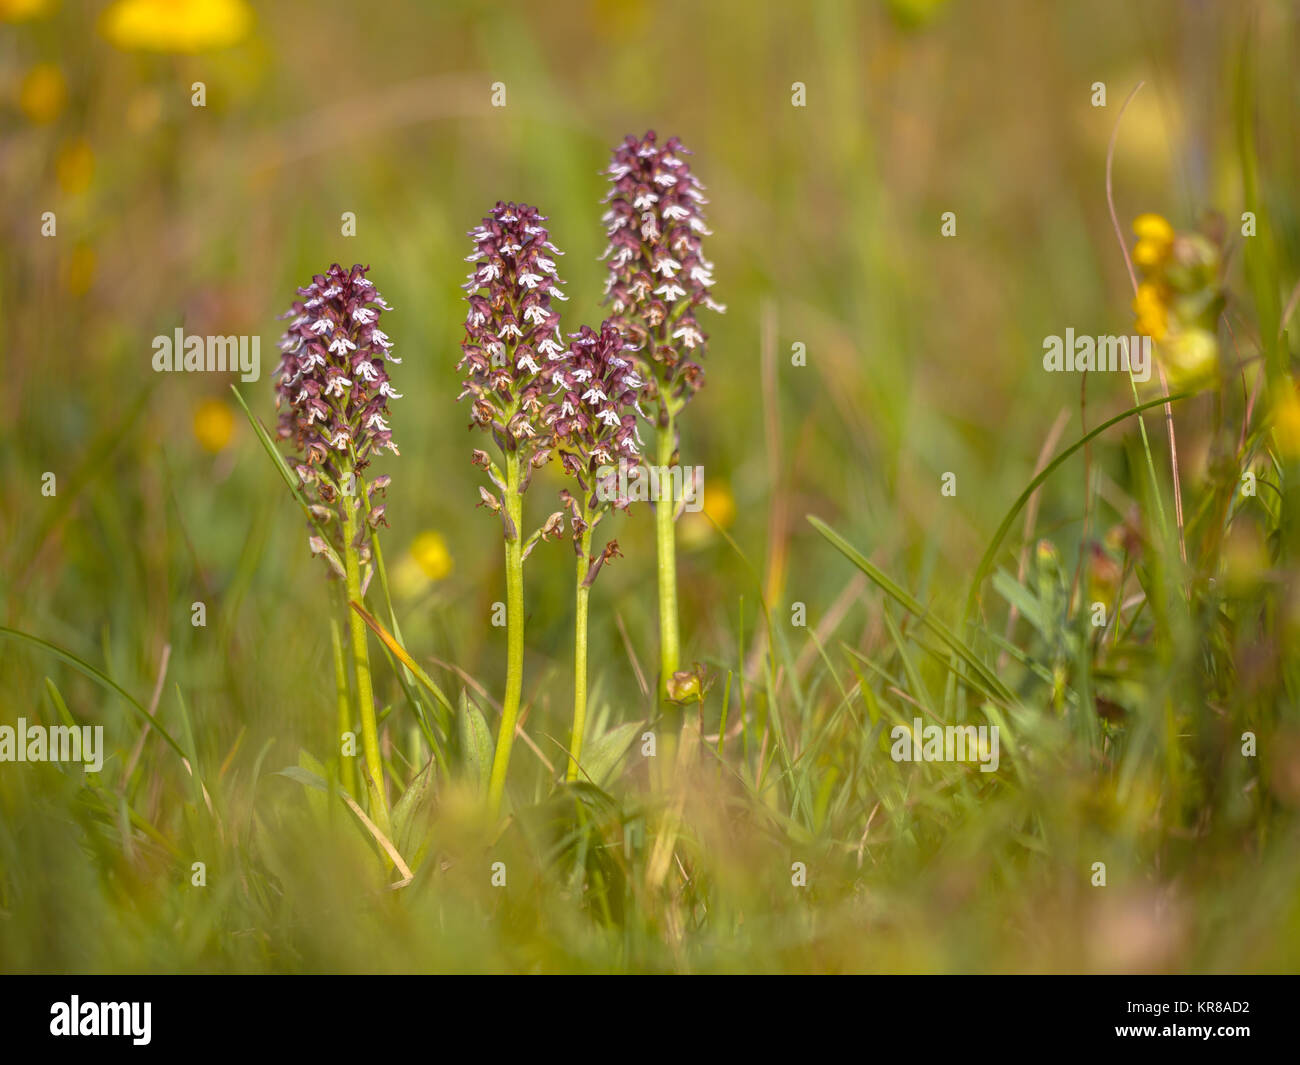 Group of burnt orchids (Neotinea ustulata) in natural grass field Stock Photo